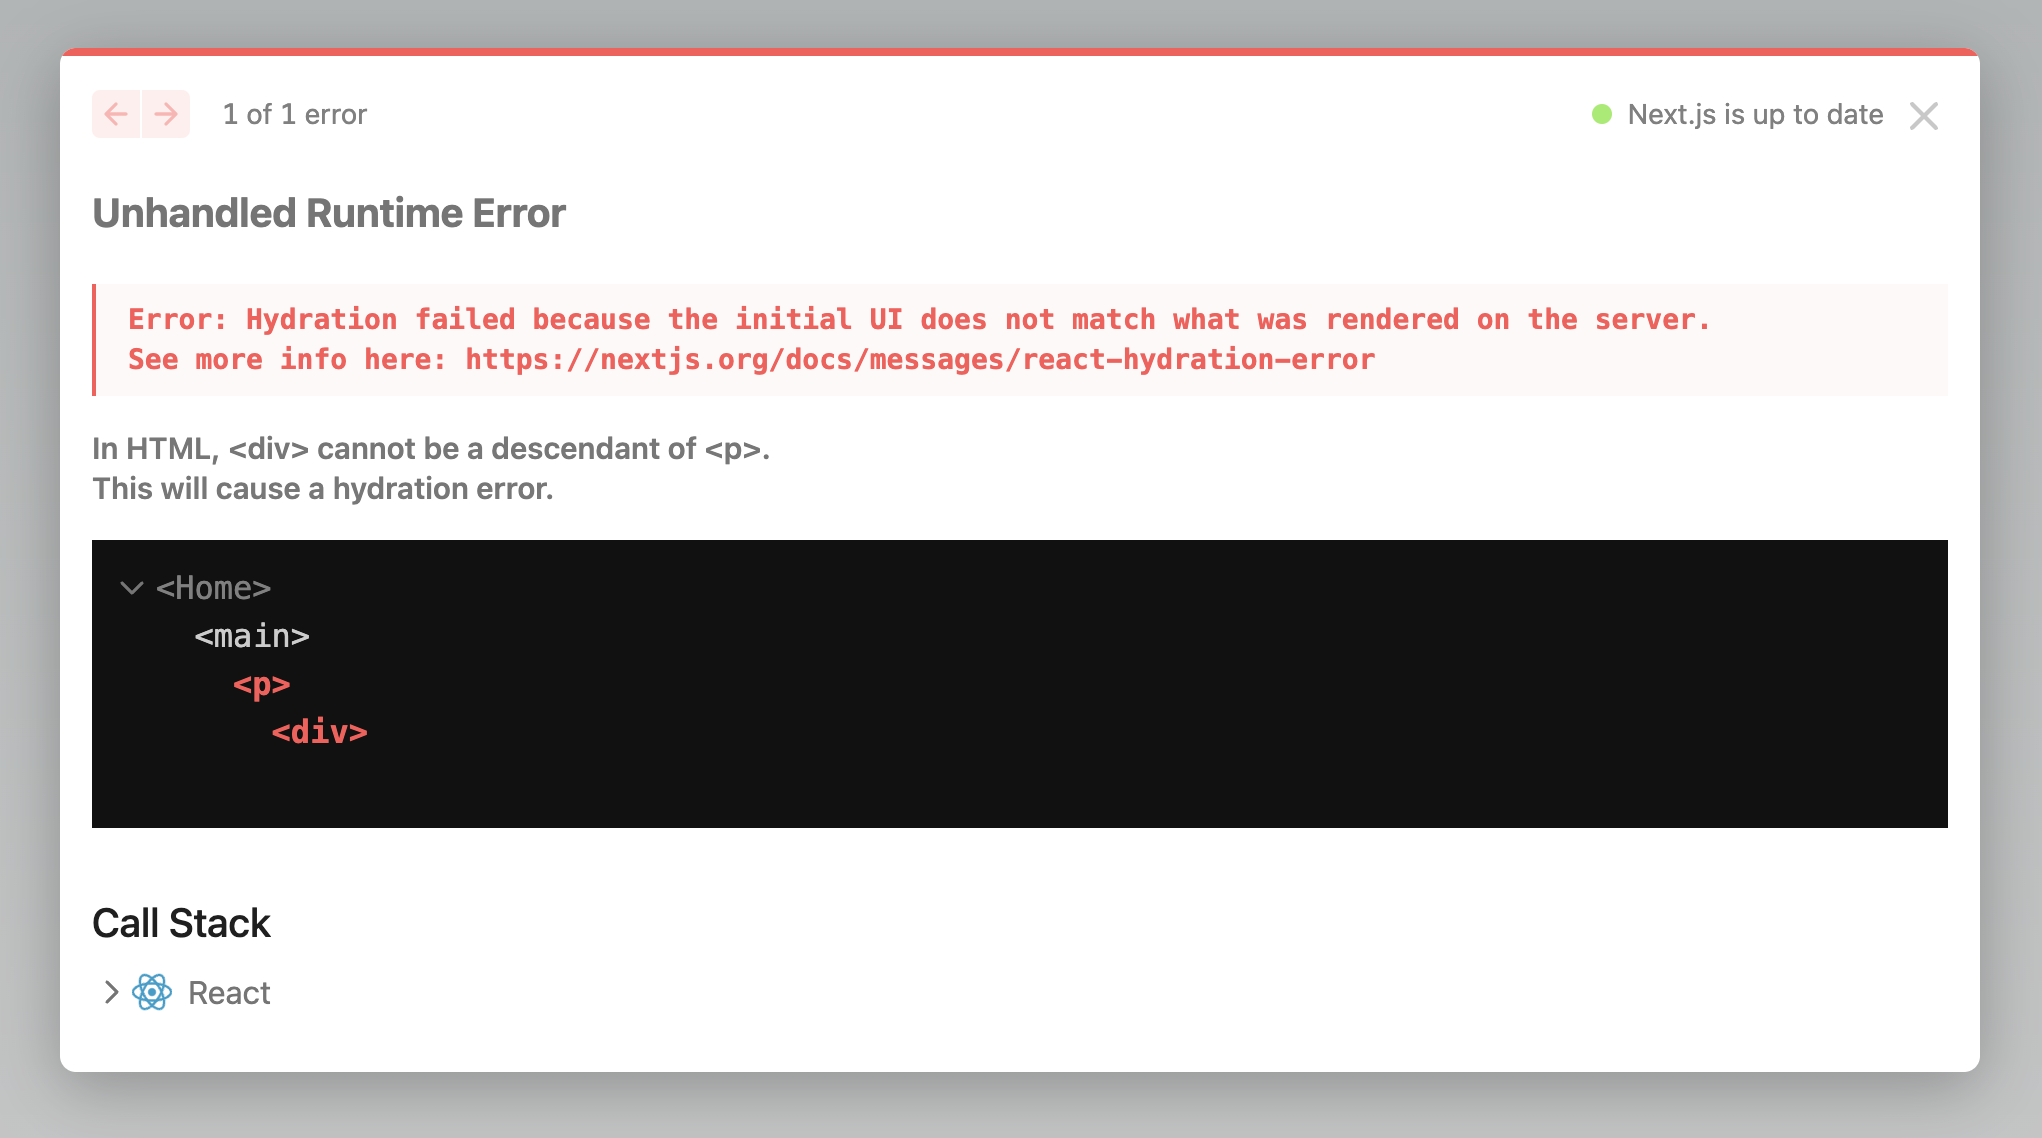 An example of the Next.js error overlay after version 14.2.